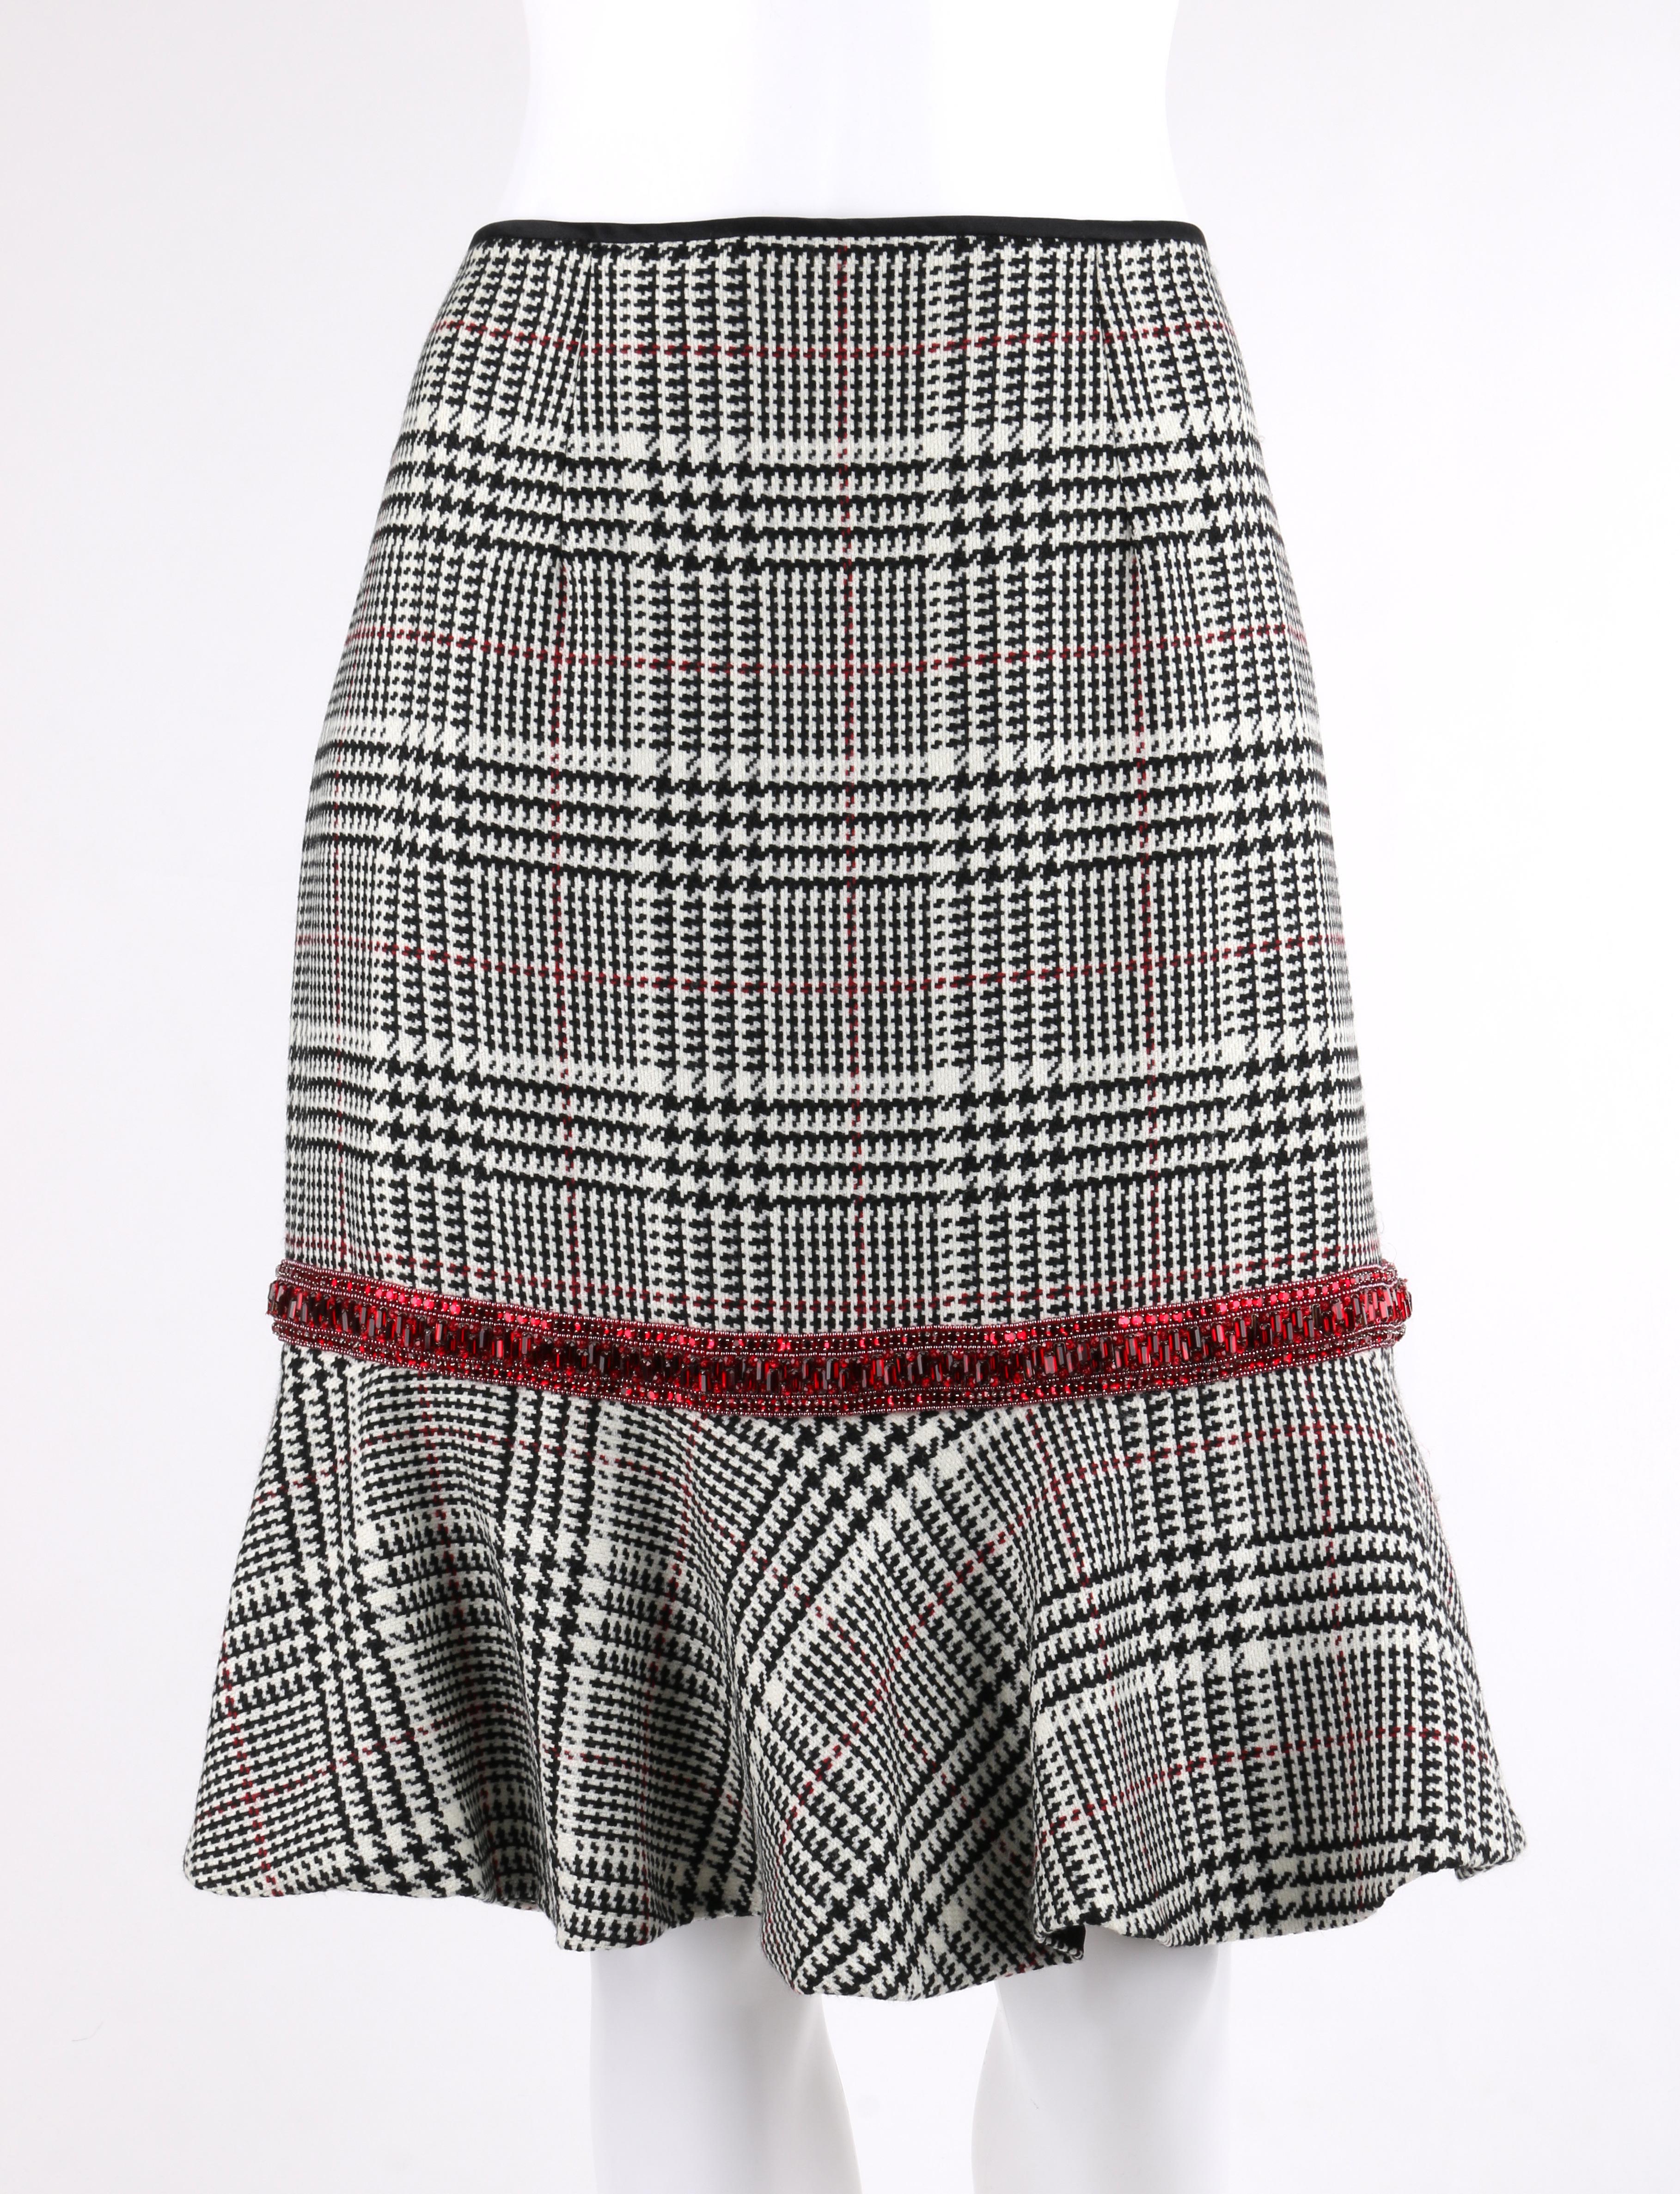 Gray PEGGY JENNINGS Couture Houndstooth Ruby Red Trim Trumpet Skirt Jacket Dress Suit